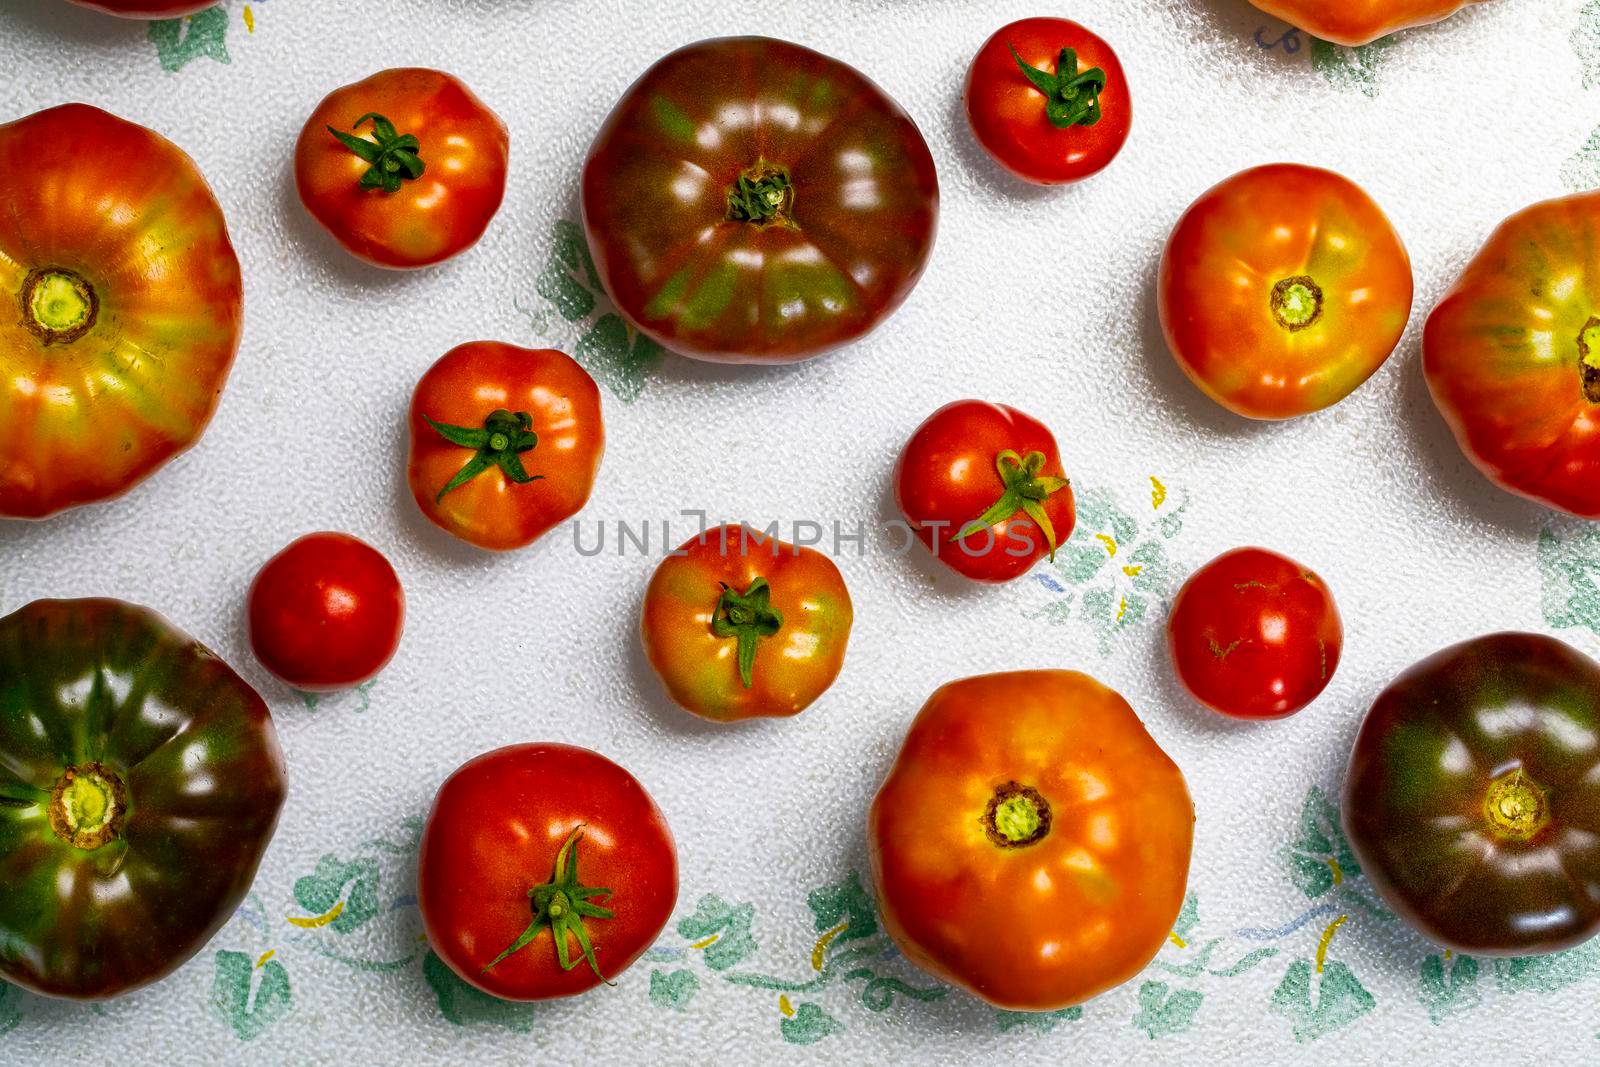 A variety of freshly harvested heirloom tomatoes set out on a cutting board.